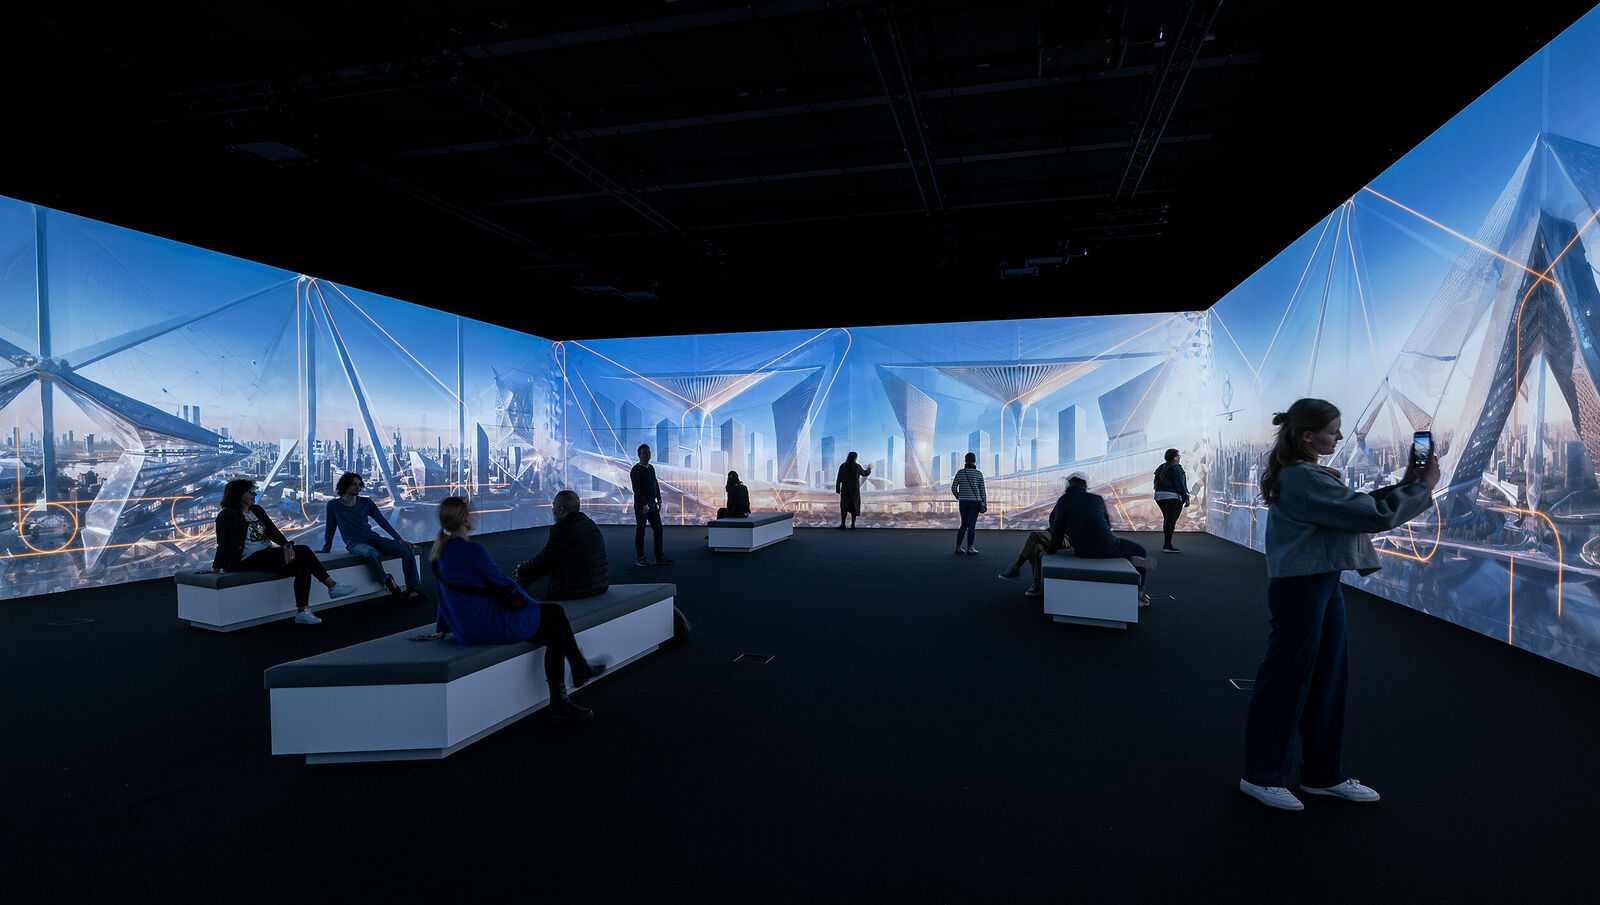 Visitors in a dark exhibit hall surrounded by large-scale illuminated cityscape projections.